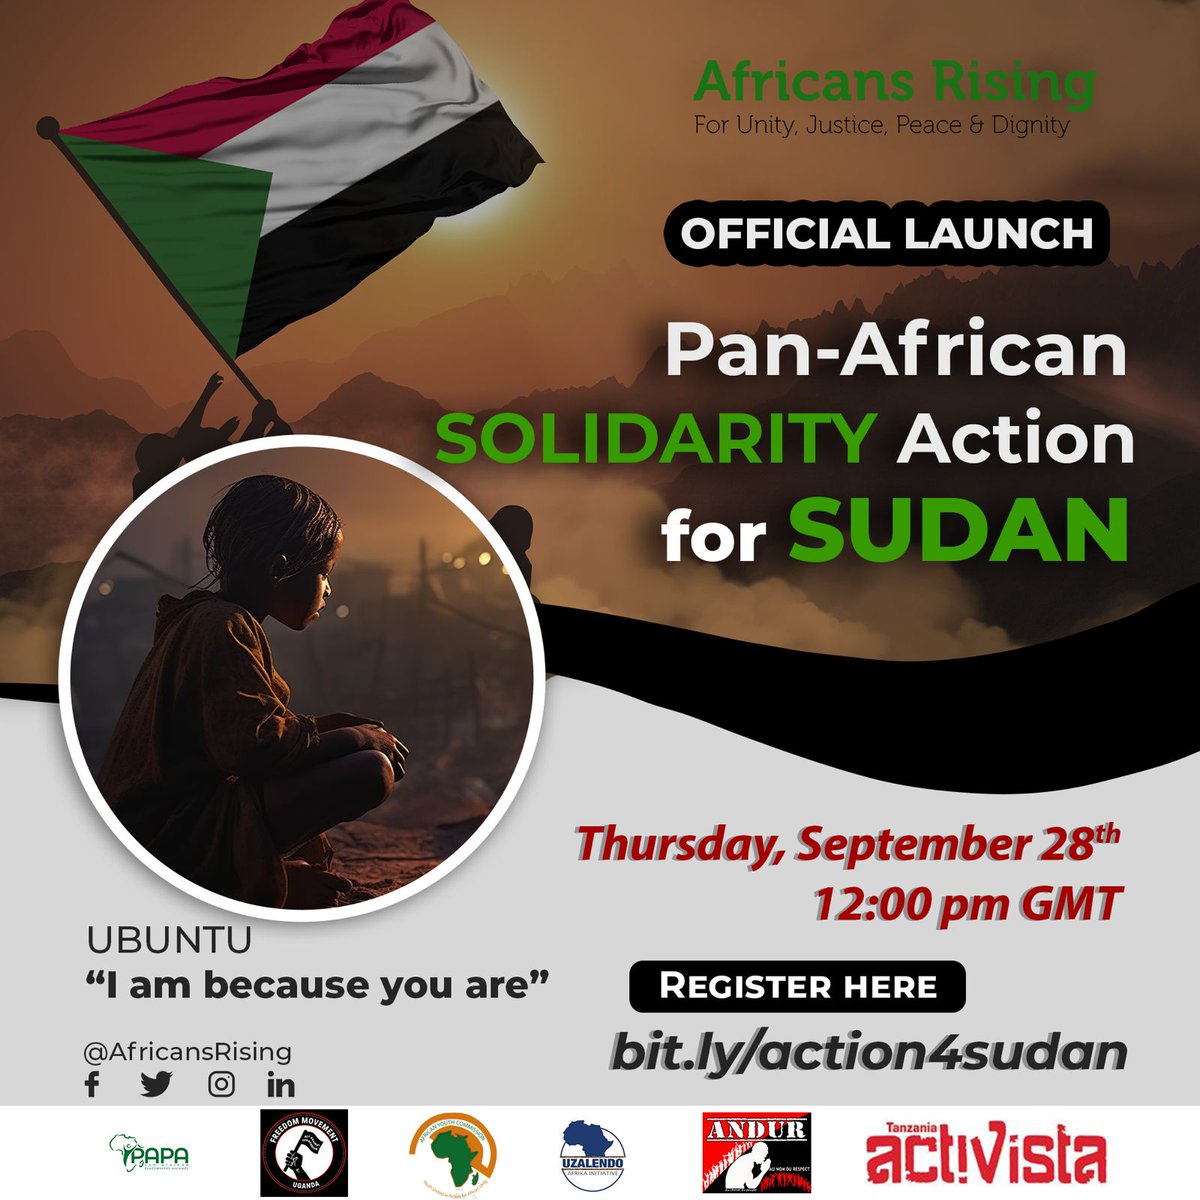 The D-day is finally here! As Pan-Africans, we convene today to officially launch the Pan-African Solidarity Action for Sudan.

Register here bit.ly/action4sudan to join.

Time: 1200GMT

#IamSudanRevolution #AfricansRising 
#LetOurPeopleMove
#BorderlessAfrica